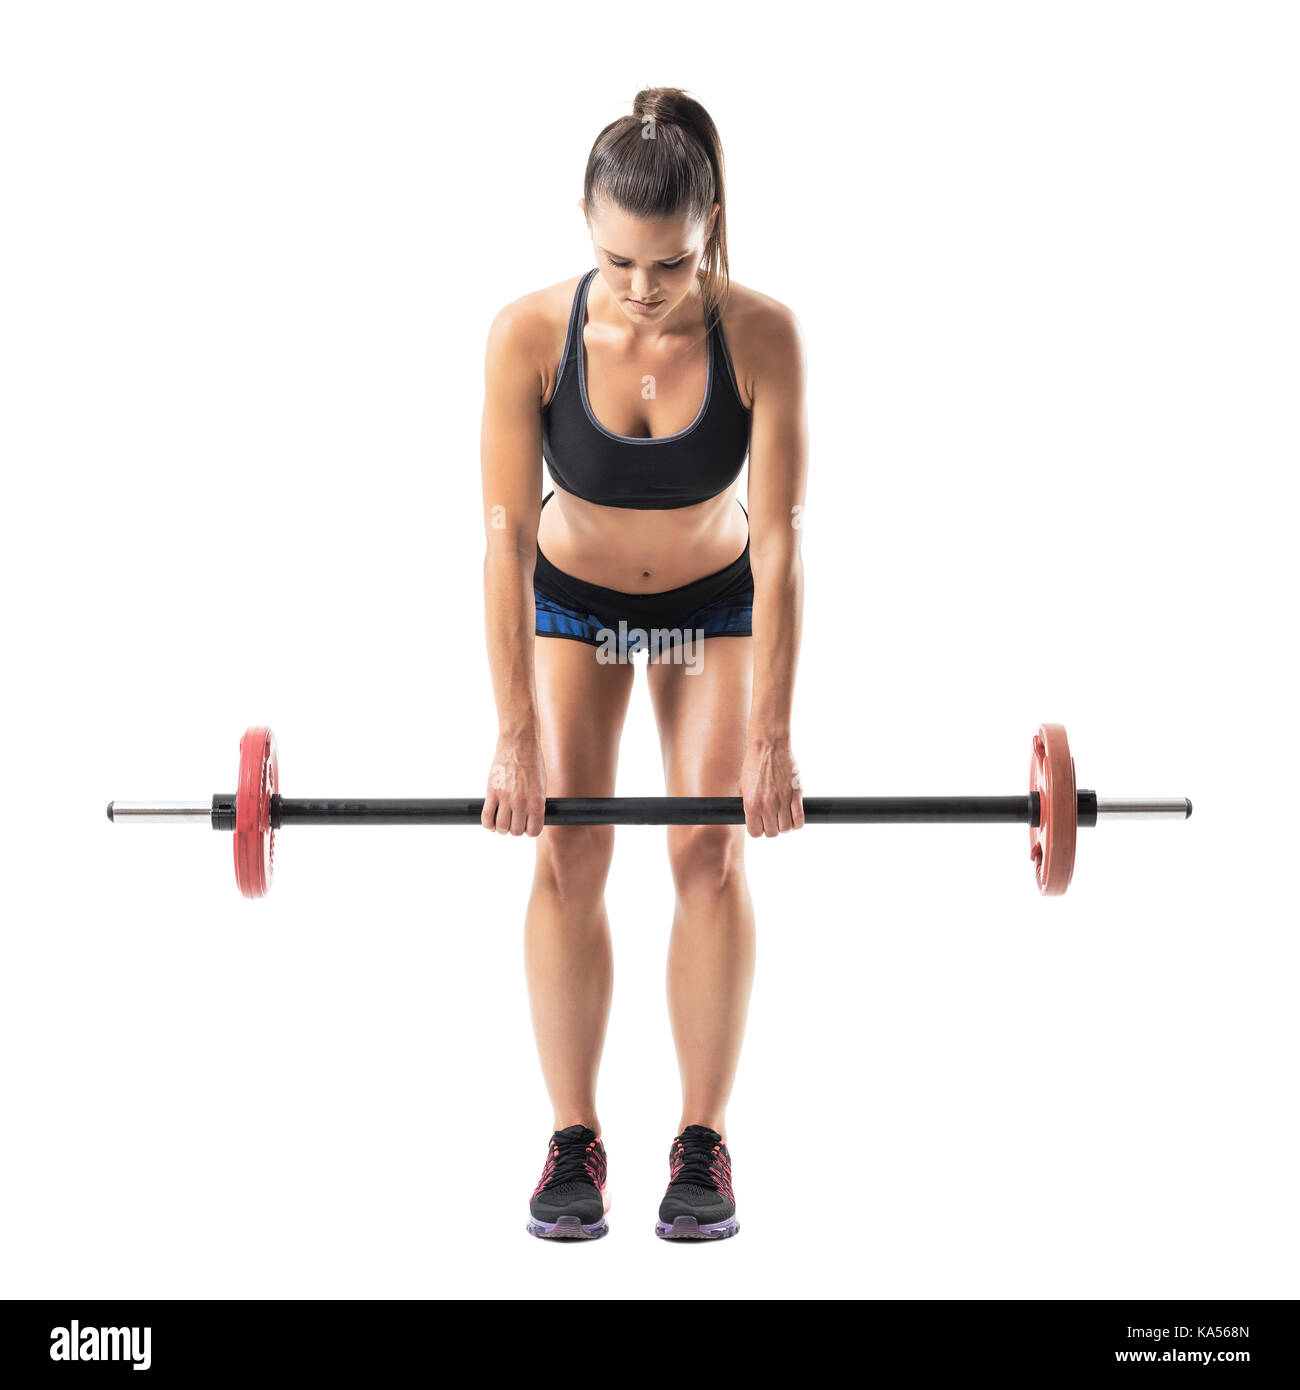 Front view of bent female athlete doing dead lift exercise with barbell looking down. Full body length portrait isolated on white studio background. Stock Photo